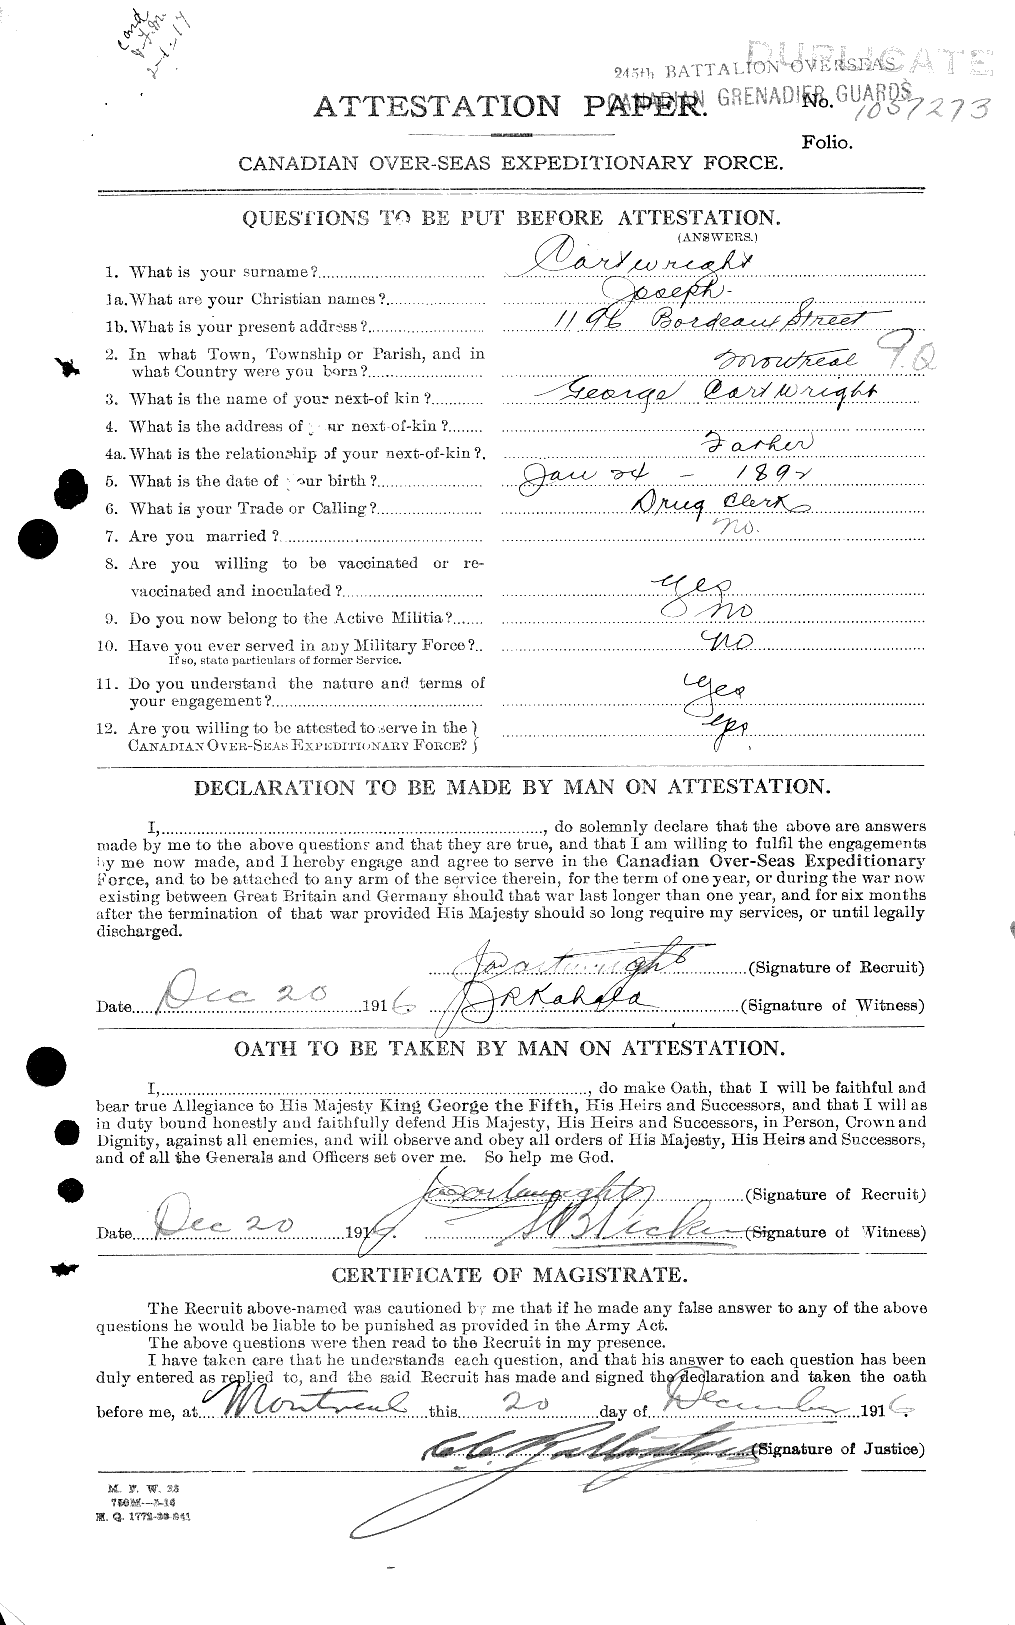 Personnel Records of the First World War - CEF 011607a